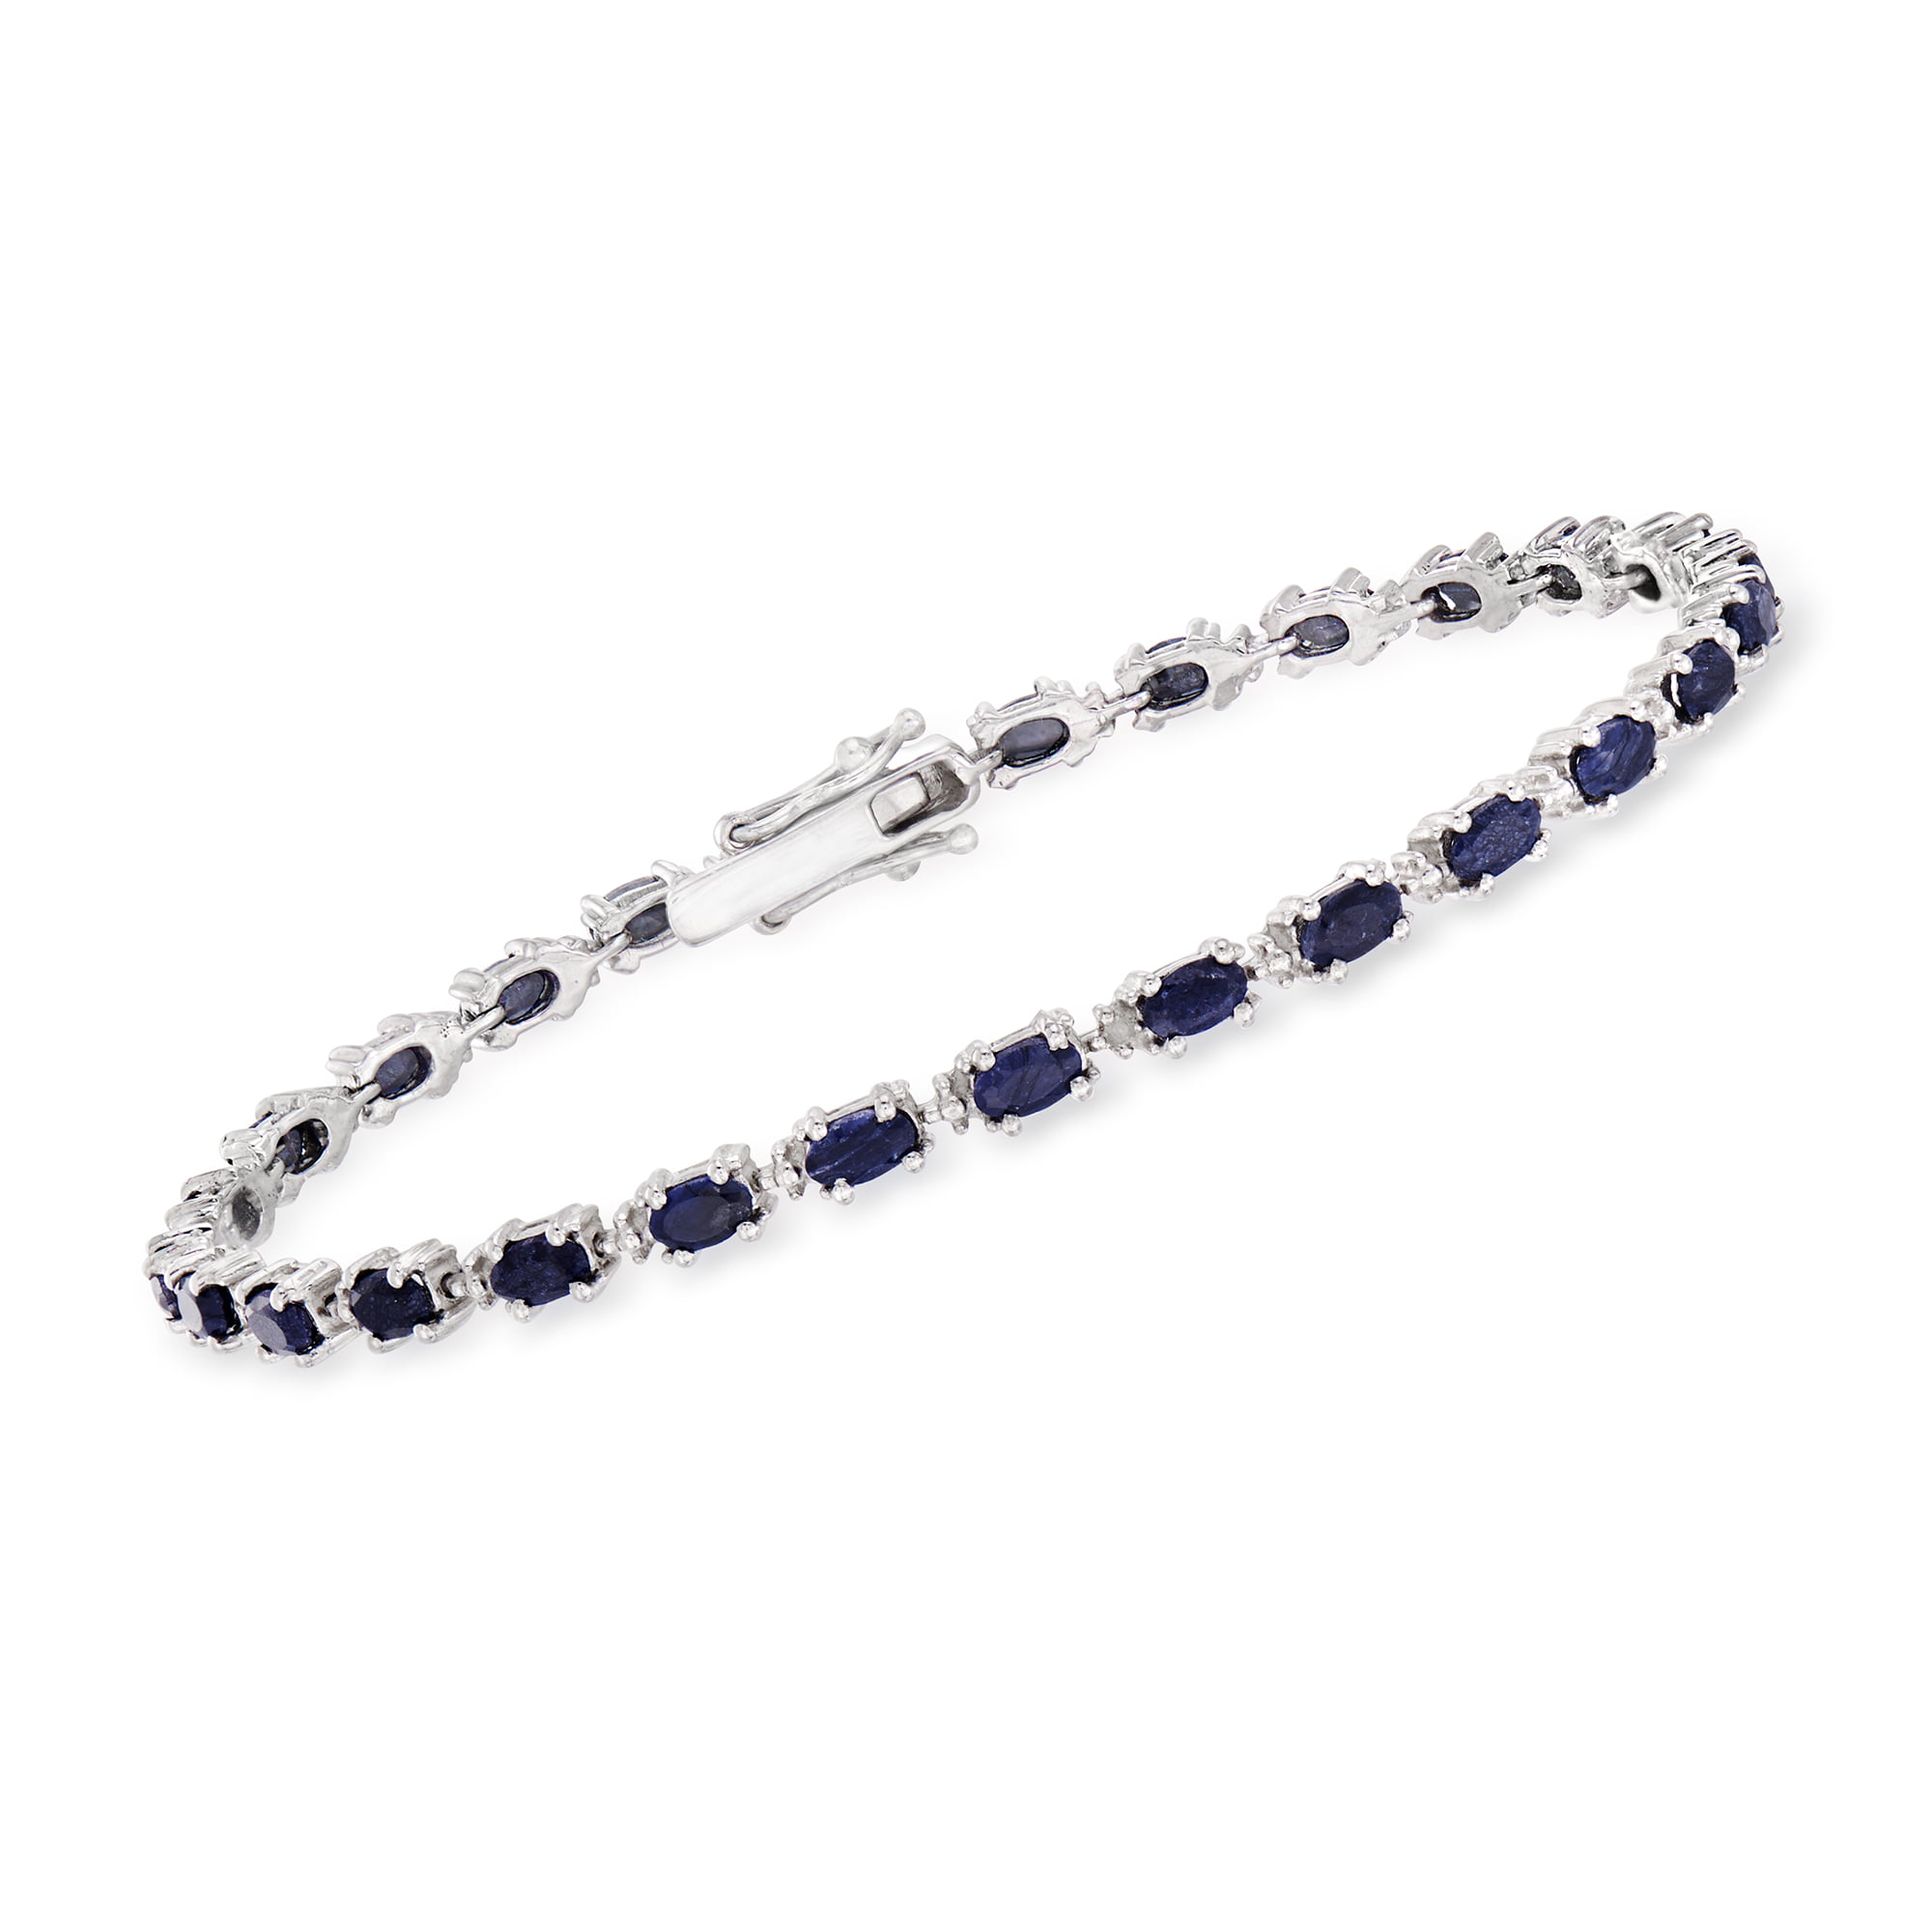 Stunning 2.00 Ct Simulated Sapphire 925 Silver Bracelet with 1" Extender 